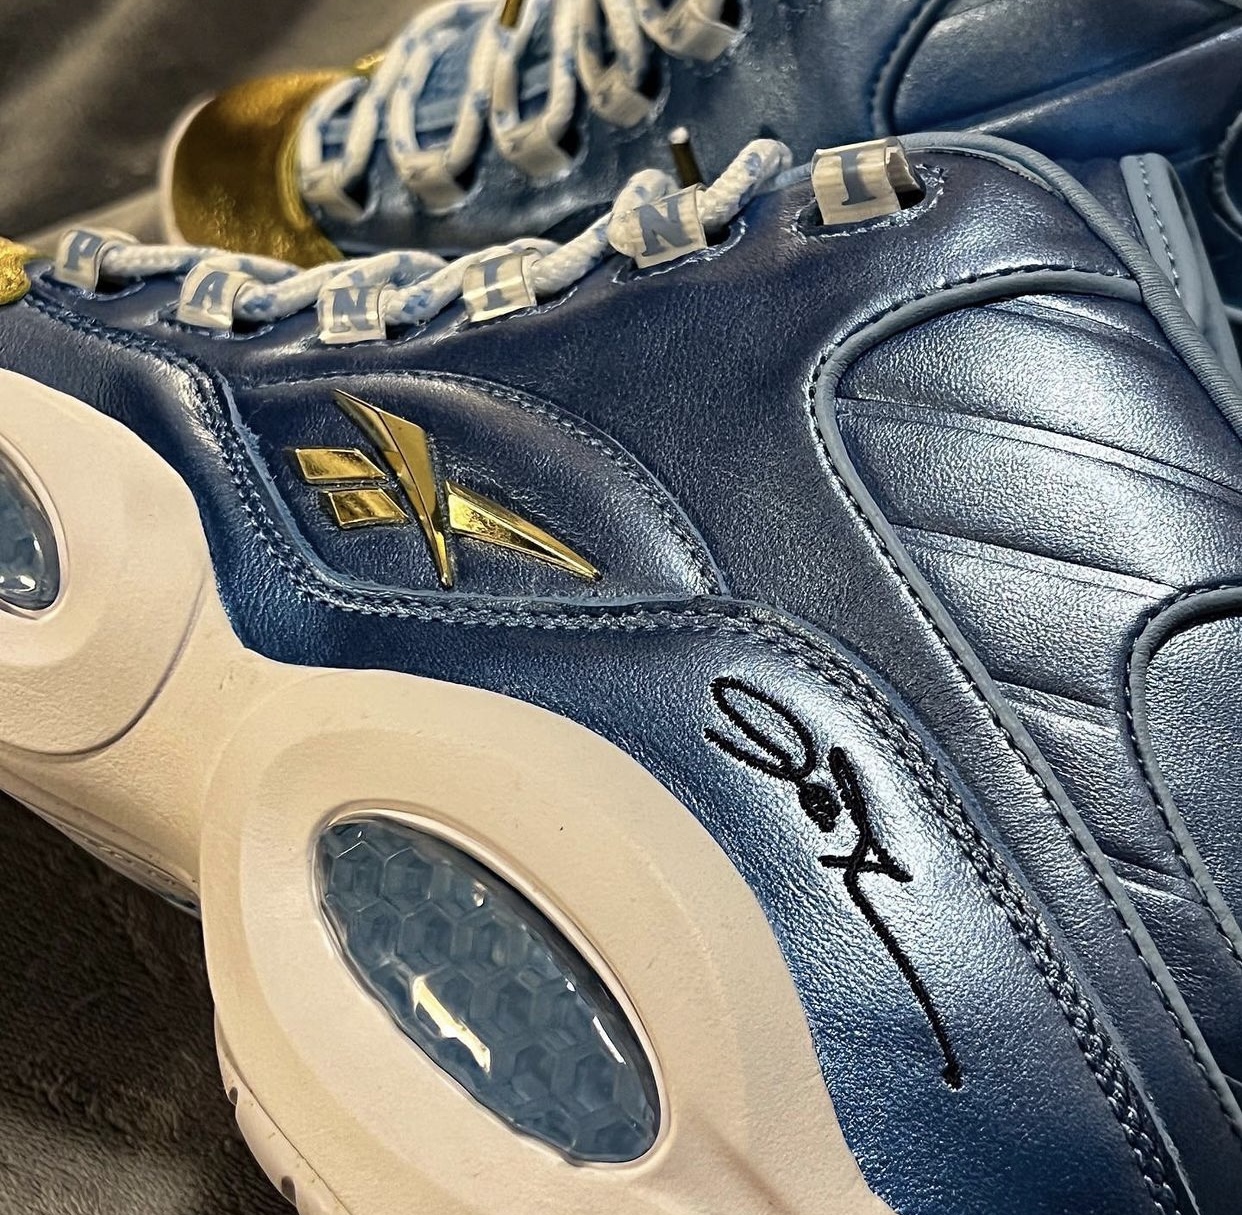 Panini Reebok Question Mid Blue Gold Friends and Family Exclusive